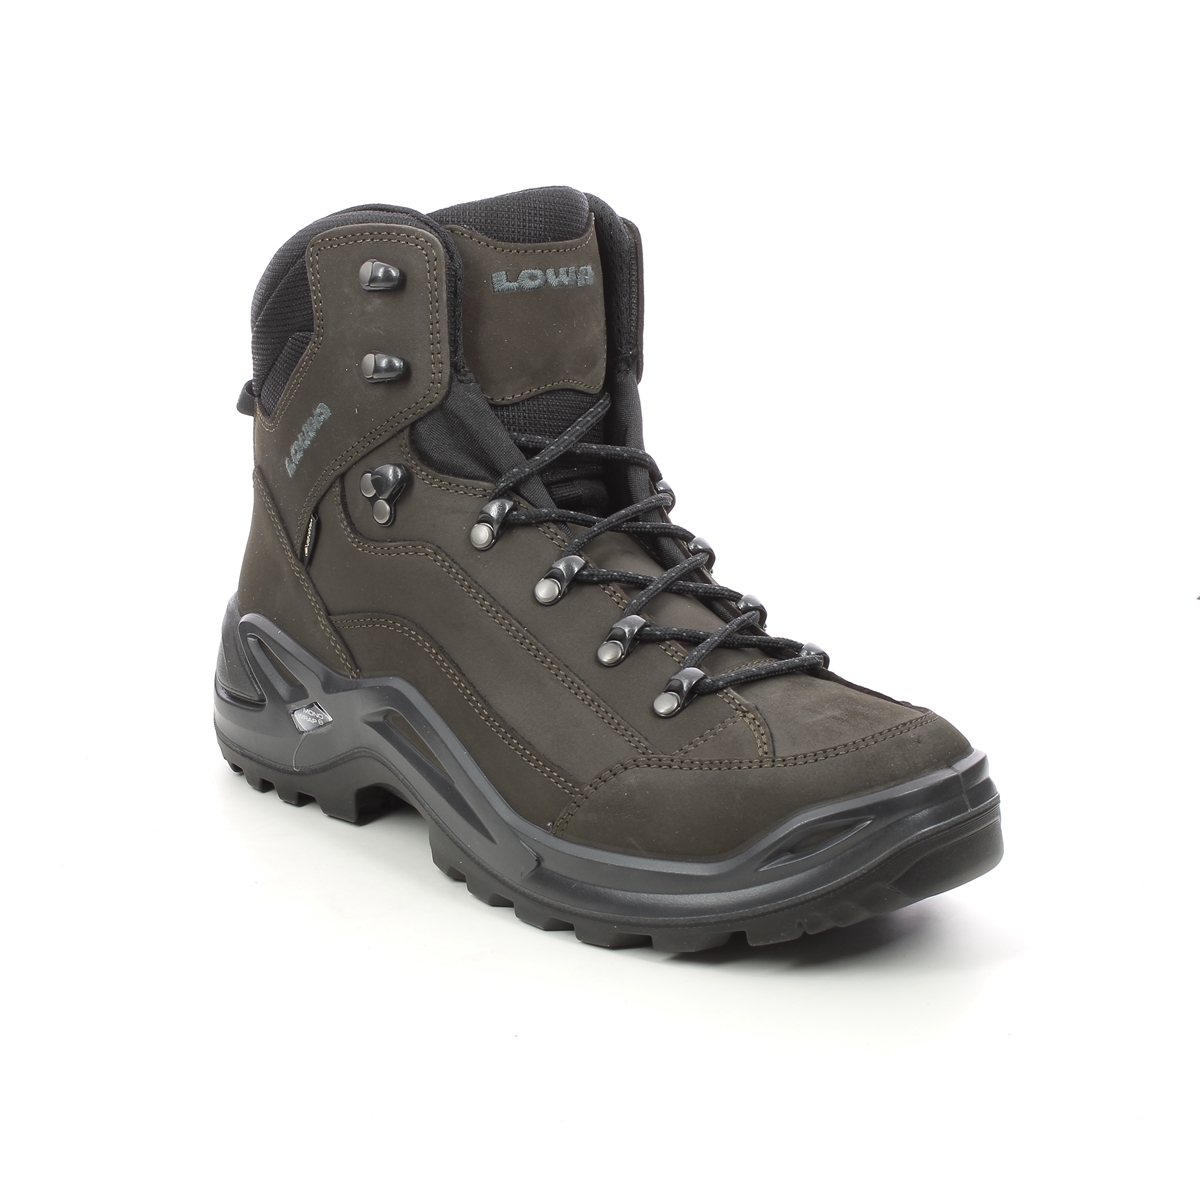 Lowa Renegade Gtx Mid Brown nubuck Mens Outdoor Walking Boots 310945-4309 in a Plain Leather in Size 12